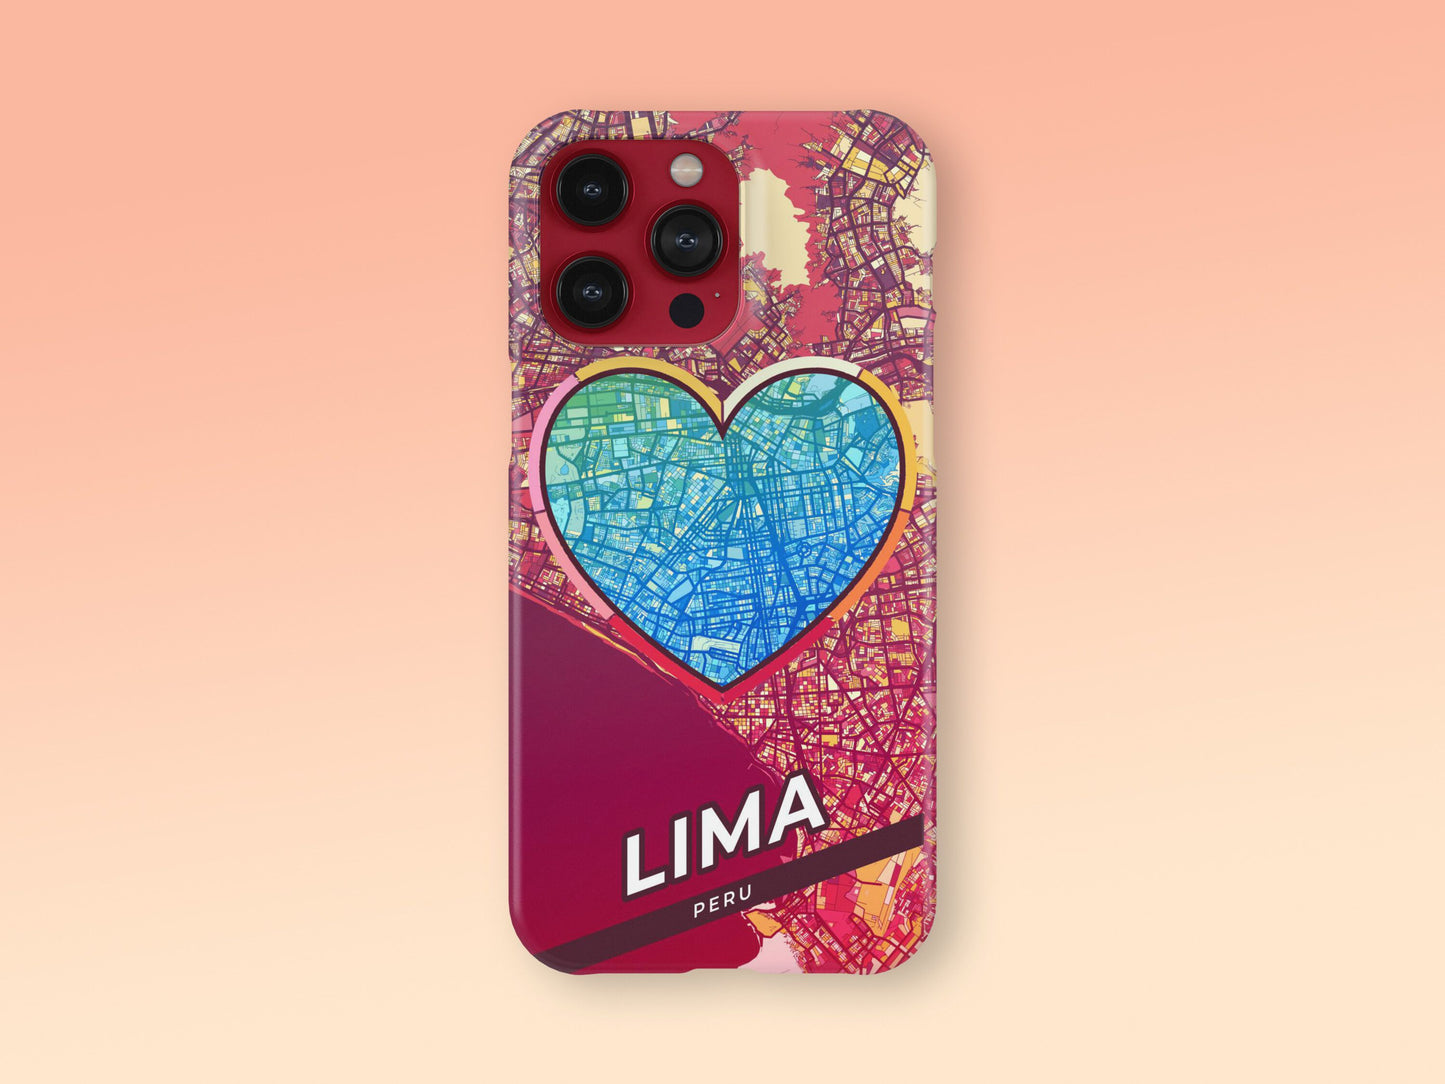 Lima Peru slim phone case with colorful icon. Birthday, wedding or housewarming gift. Couple match cases. 2